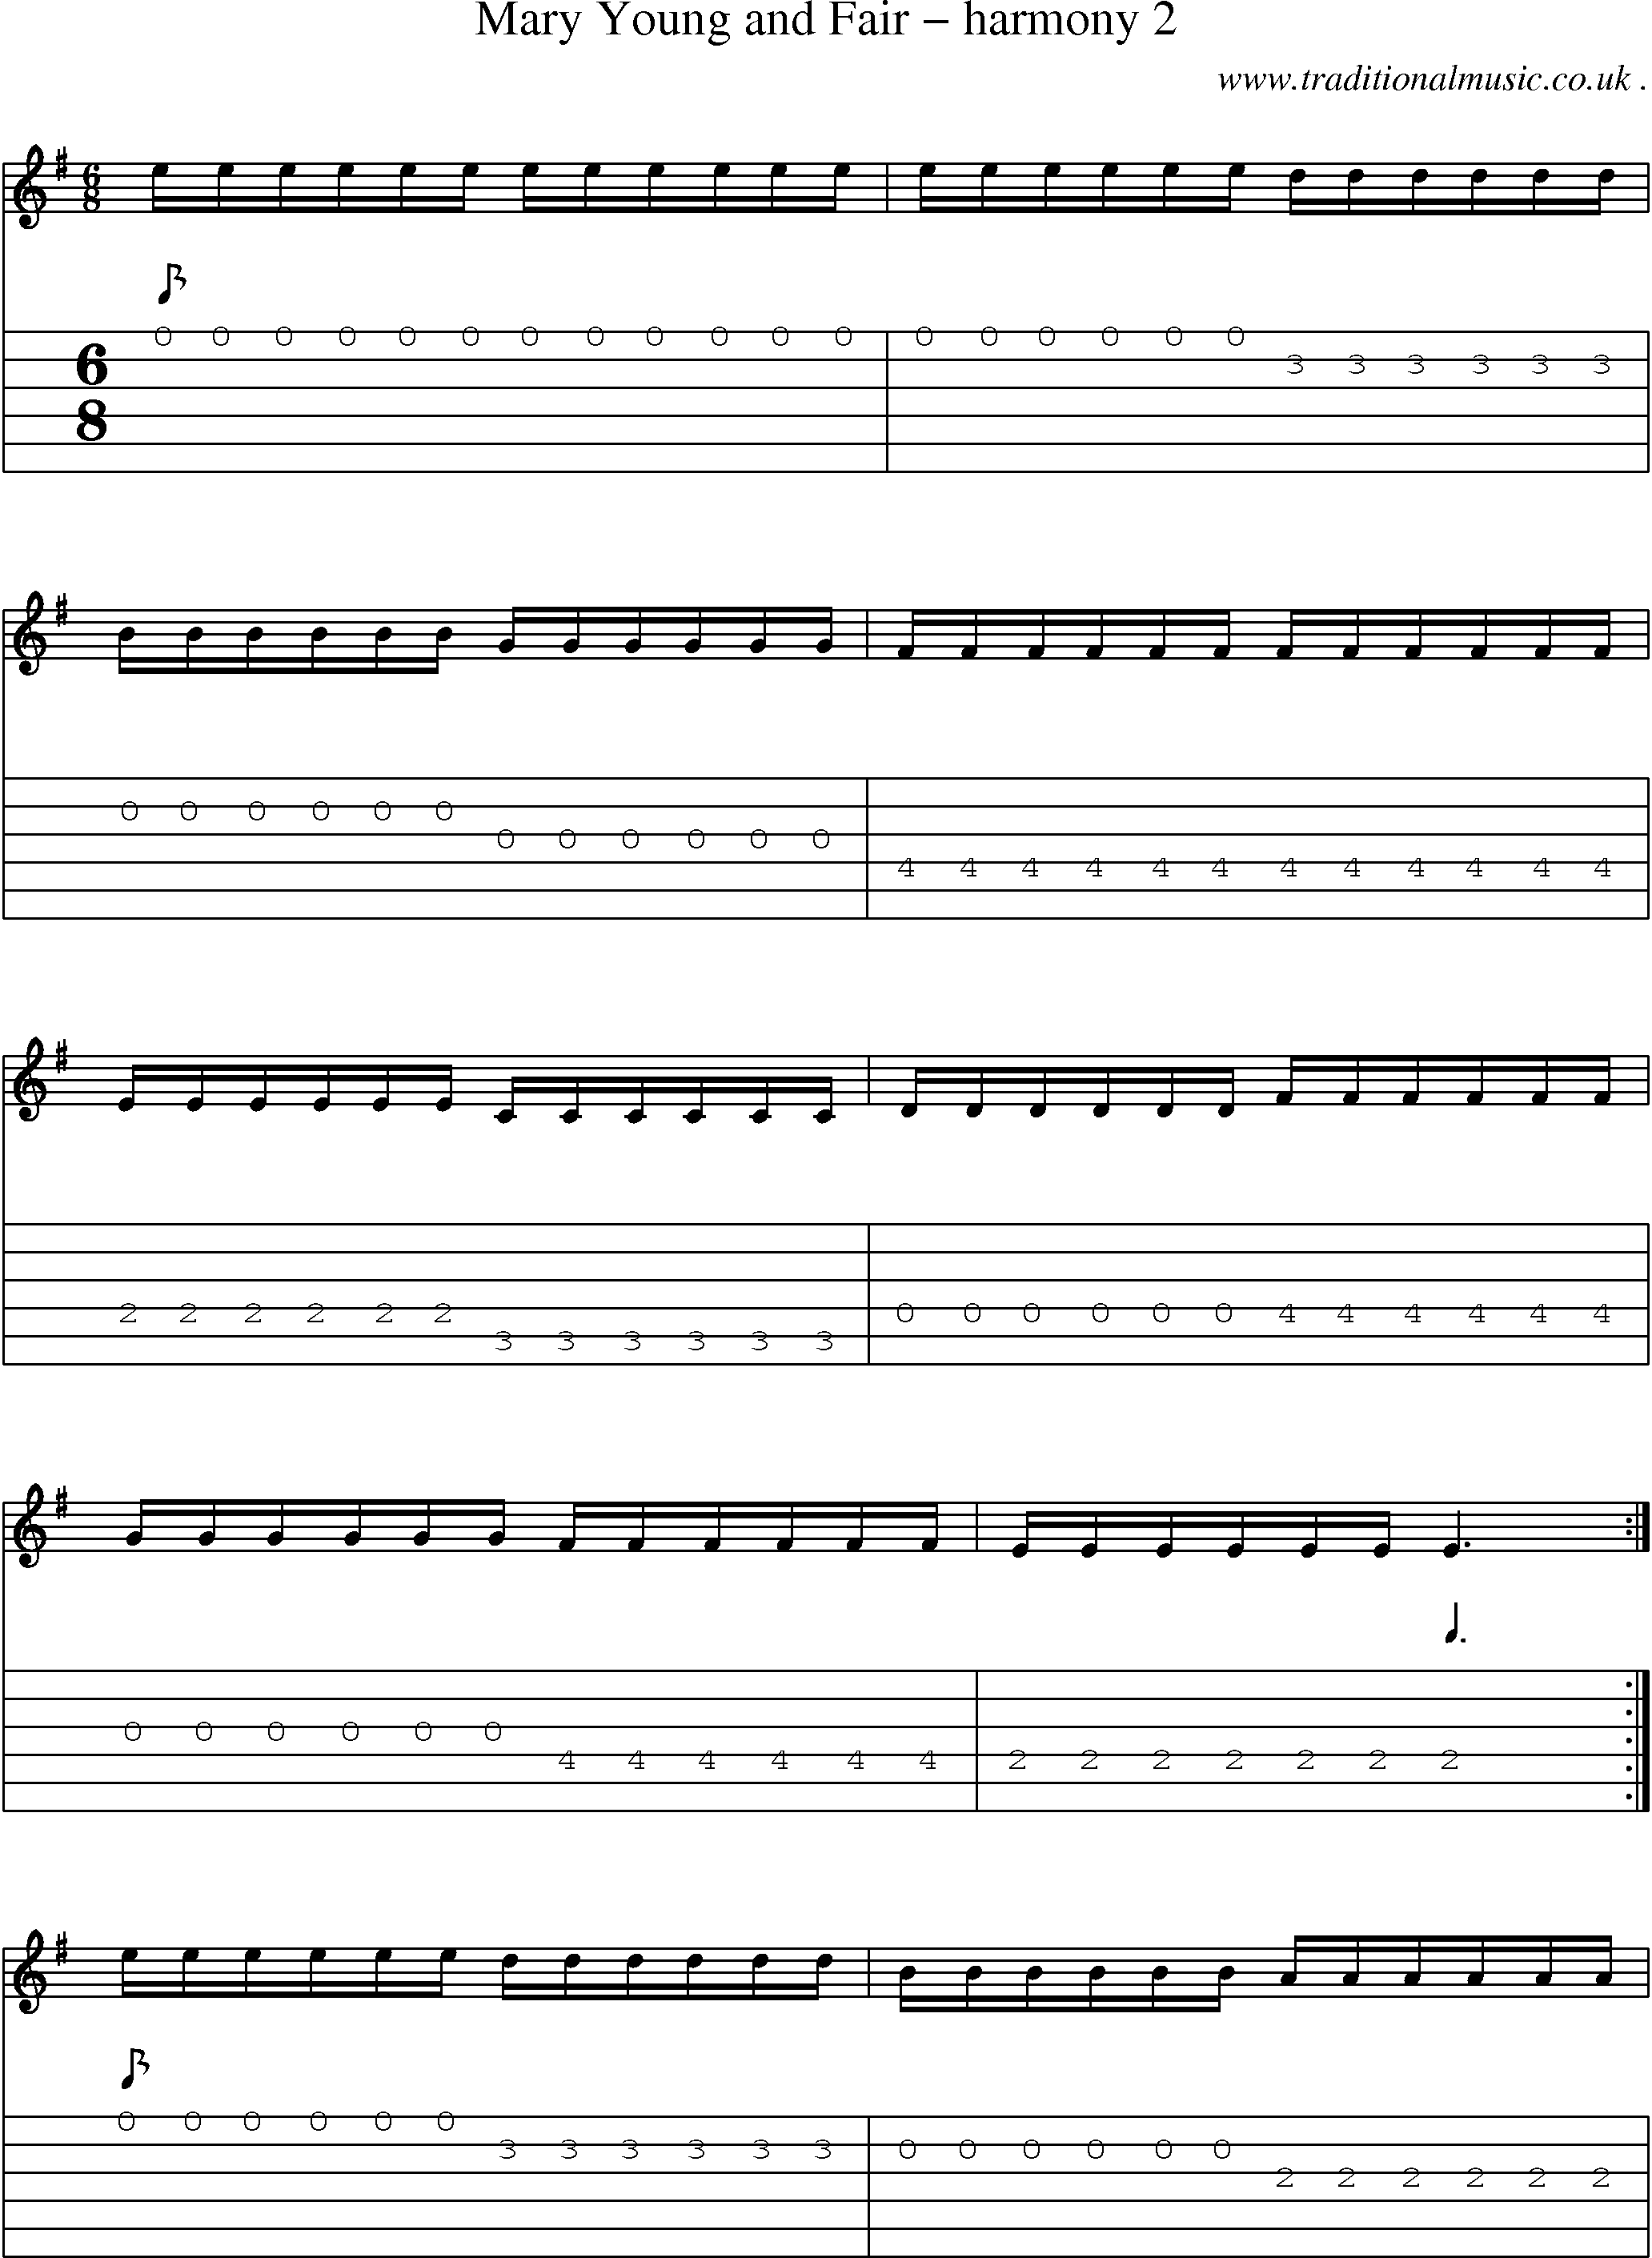 Sheet-music  score, Chords and Guitar Tabs for Mary Young And Fair Harmony 2